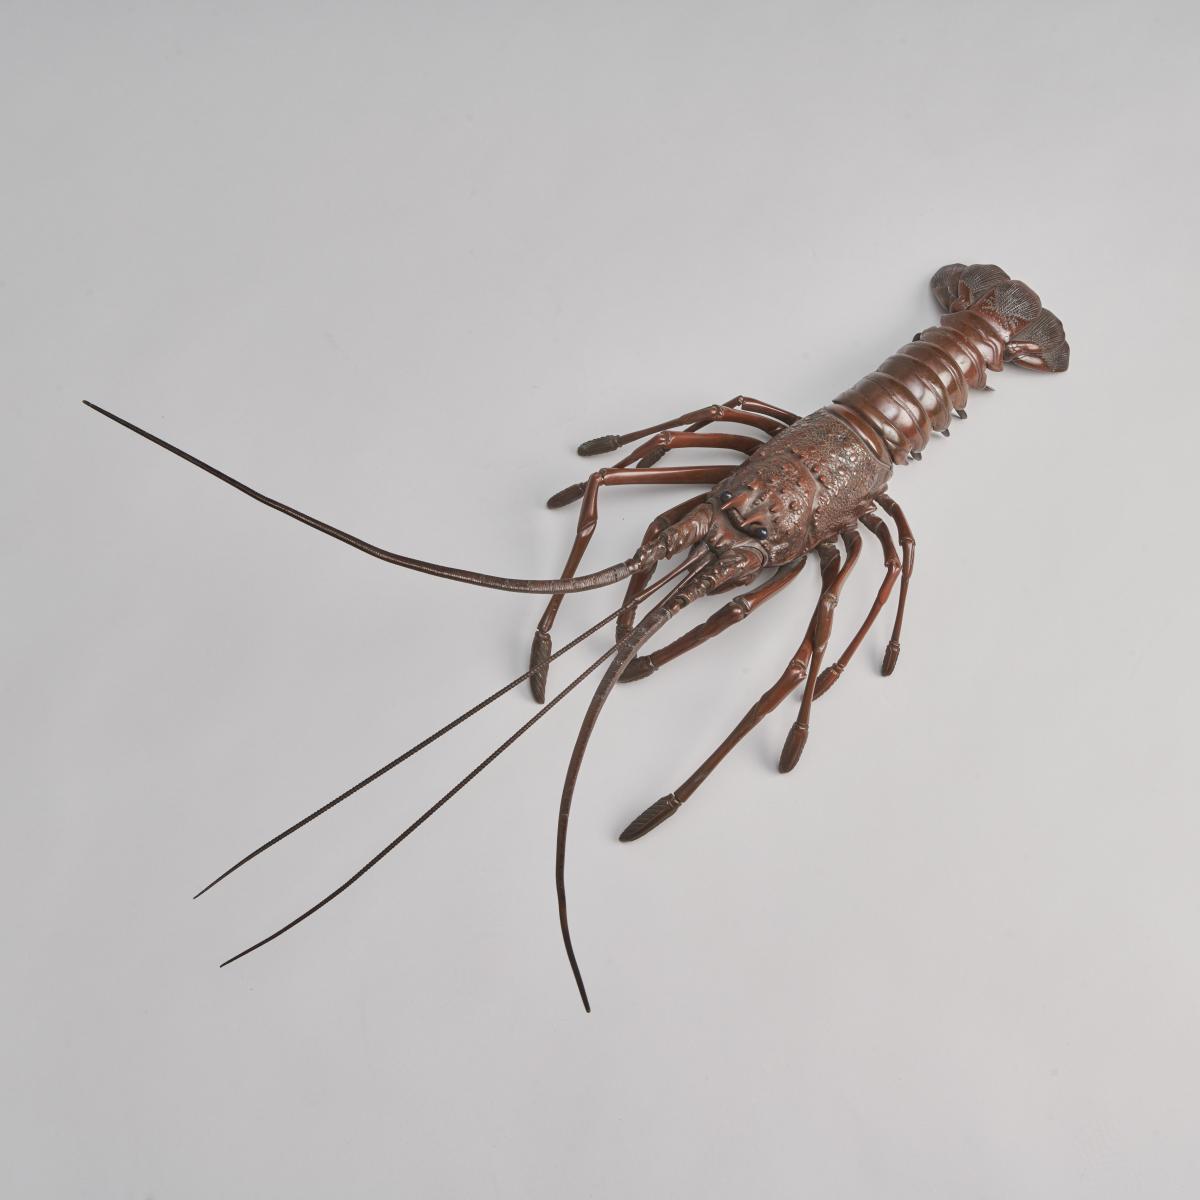 Japanese Meiji Period articulated bronze spiny lobster